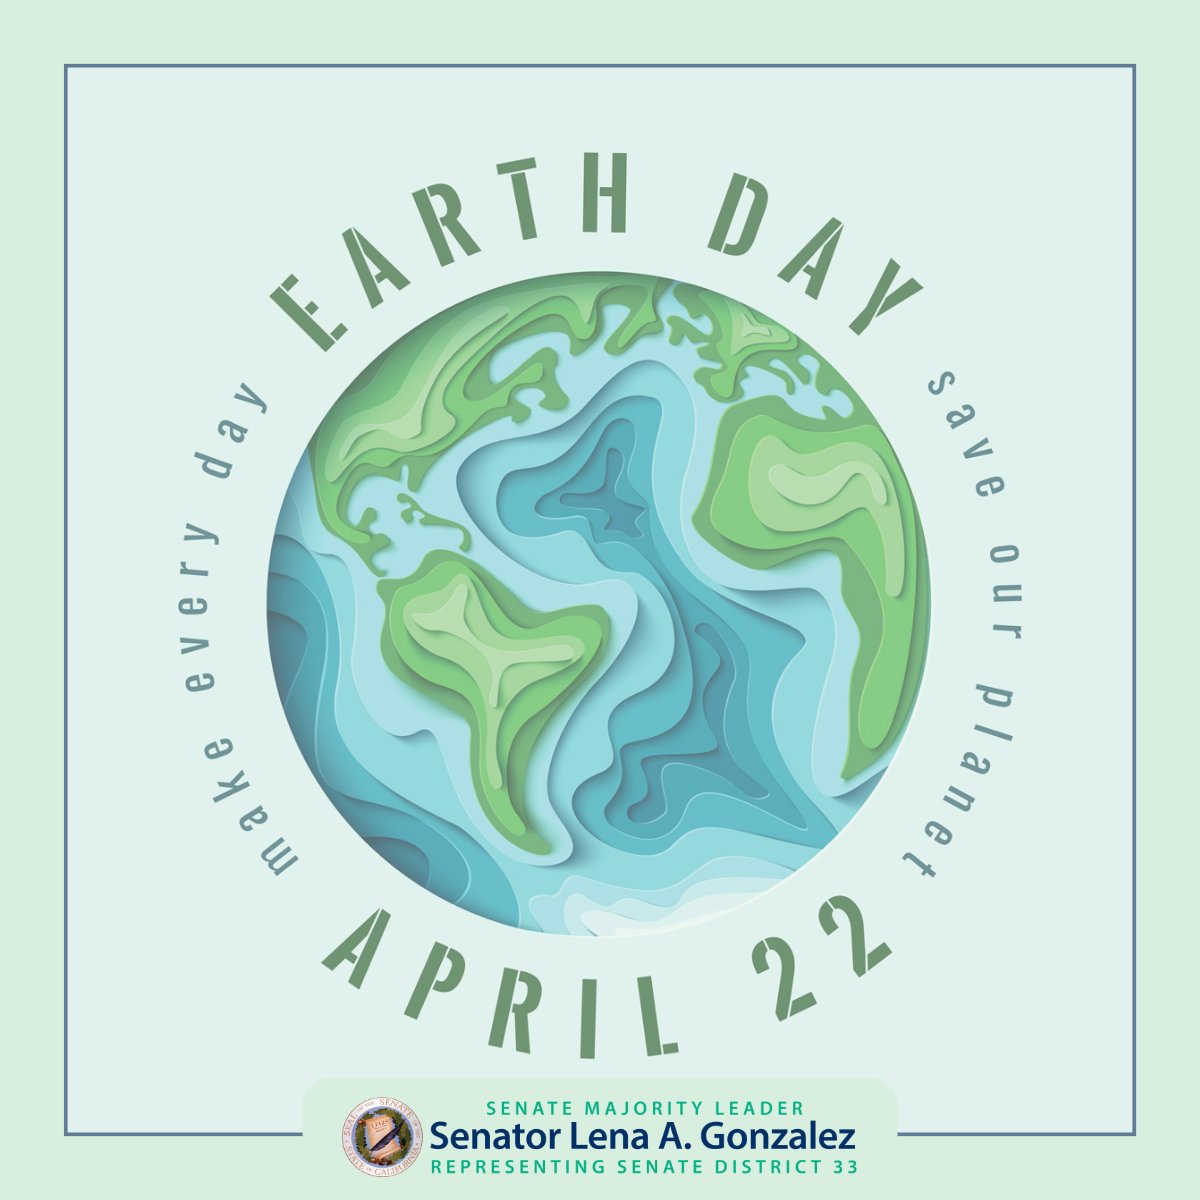 Happy #EarthDay! Today & every day we must fight for a clean environment for all 🌎🍃💚 Want to know what environmental bills my team & I are working on? Check out my Earth Month newsletter: bit.ly/EarthMonthNews And a full list of 2024 my bills here: bit.ly/LG2024Bills